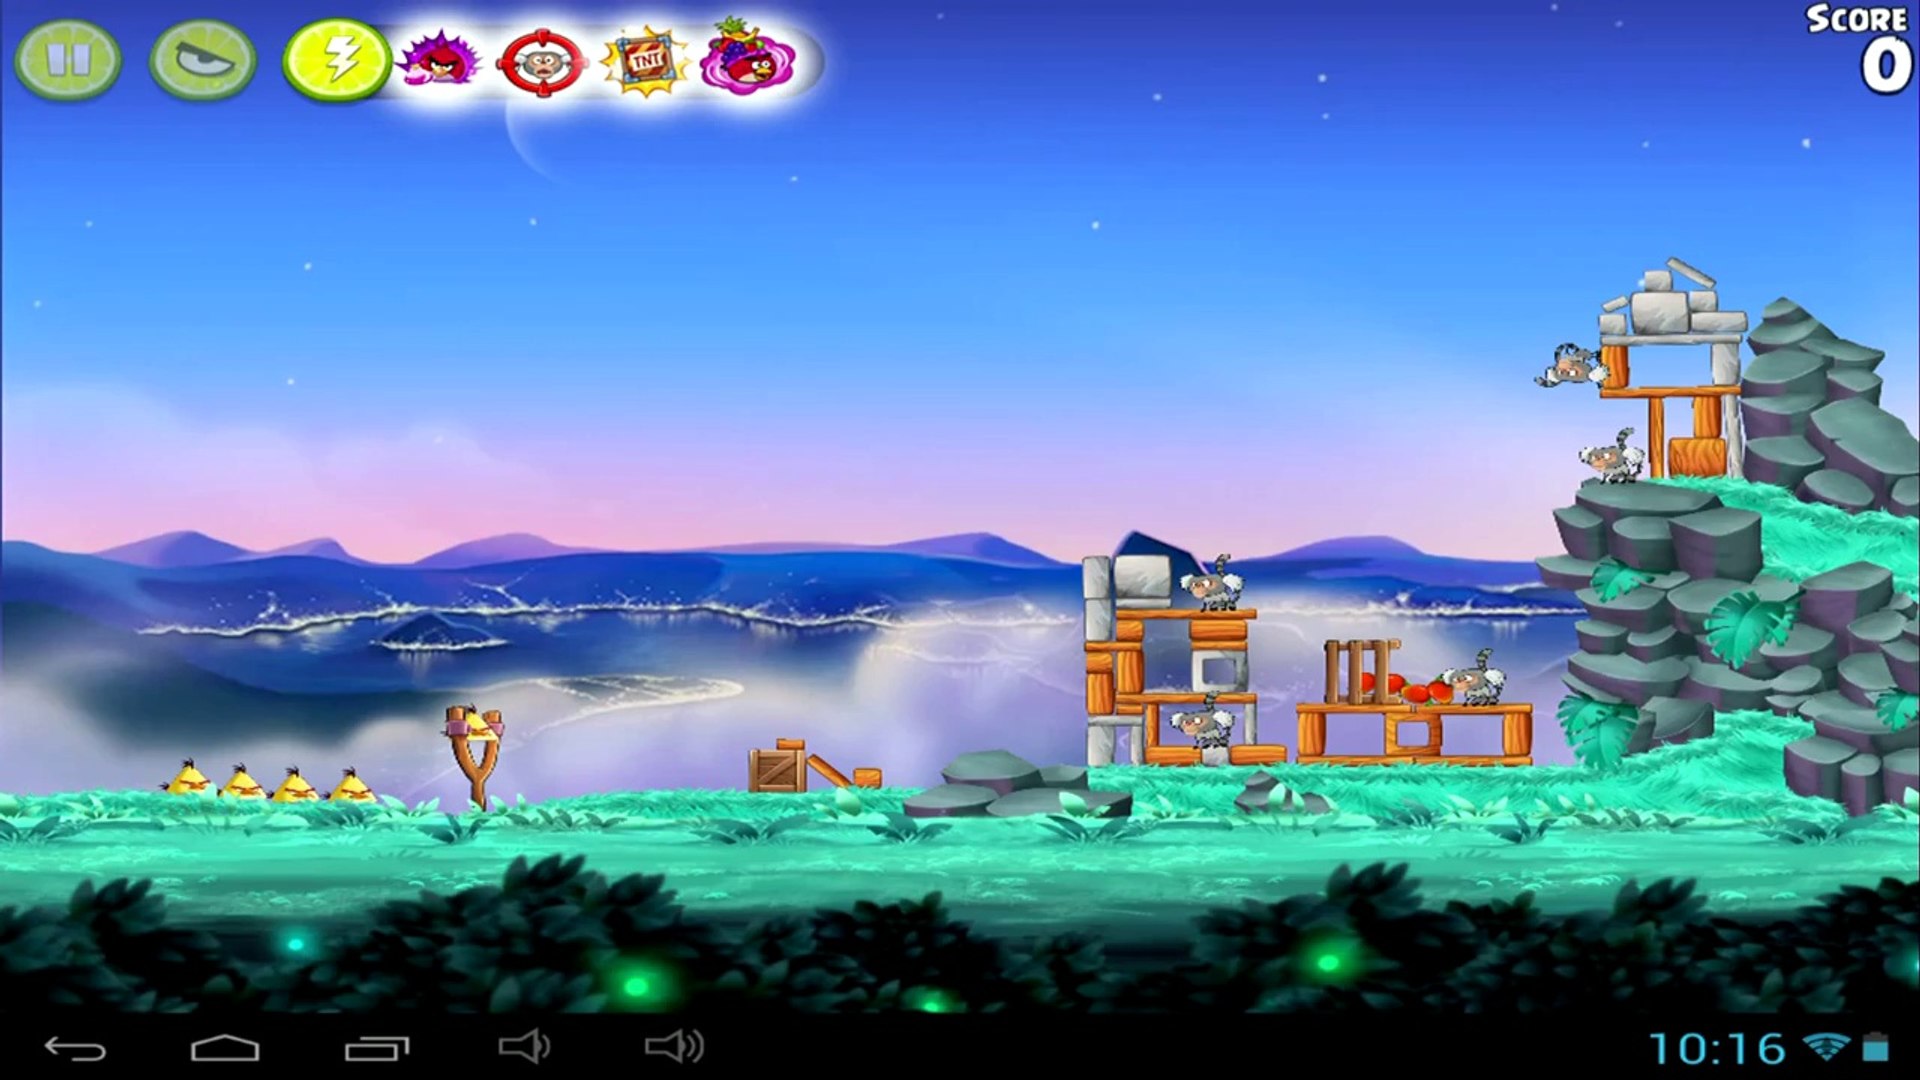 Angry Birds Rio PC Game - Free Download Full Version